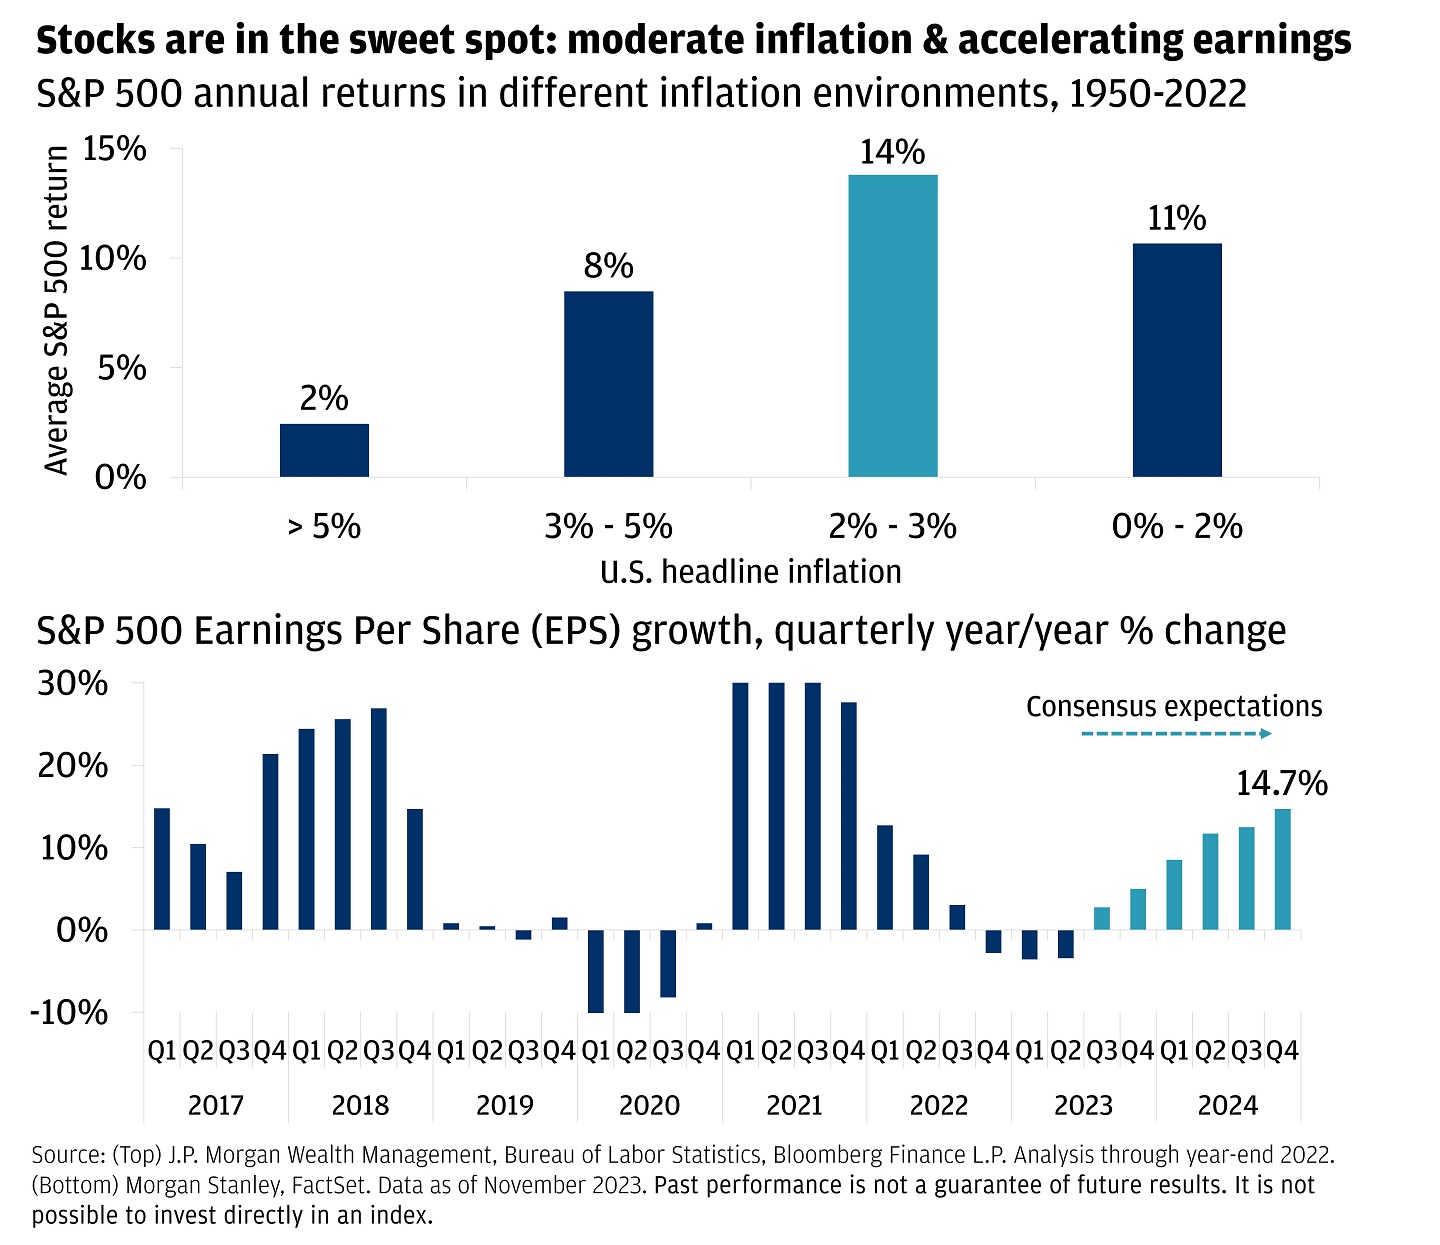 The chart shows two graphics, on top the S&P 500 annual returns and the bottom chart is S&P 500 Earnings Per Share (EPS) growth.